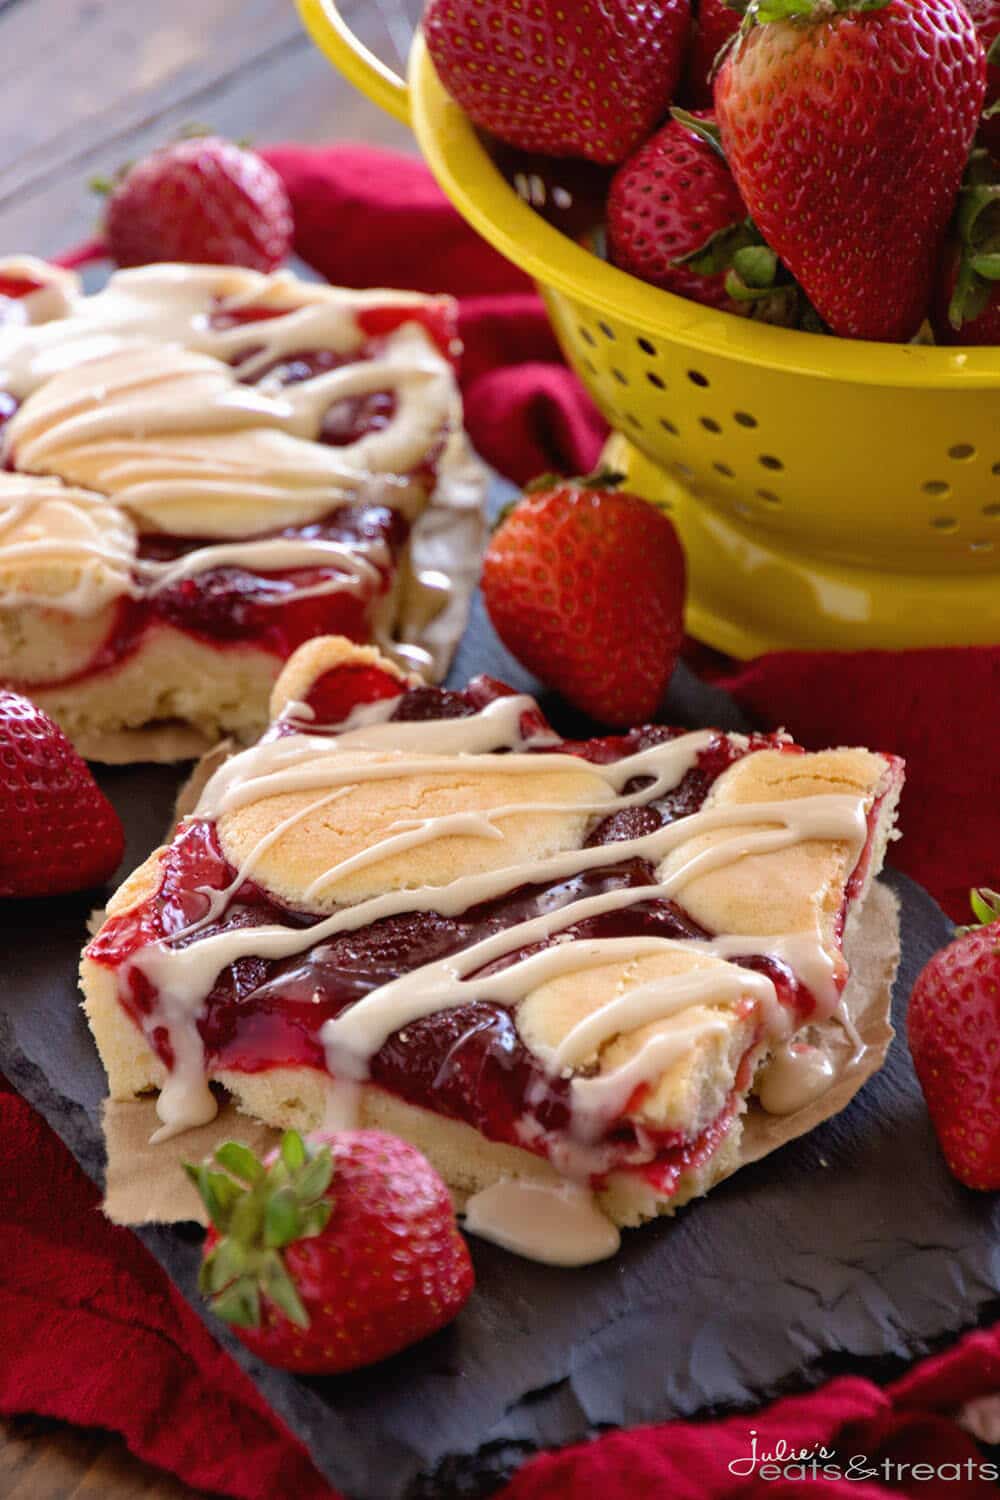 Strawberry Pie Bars ~ Quick and Easy Bars Stuffed with Strawberry Pie Filling in between a Soft and Delicious Almond Crust then Drizzled with Almond Icing!